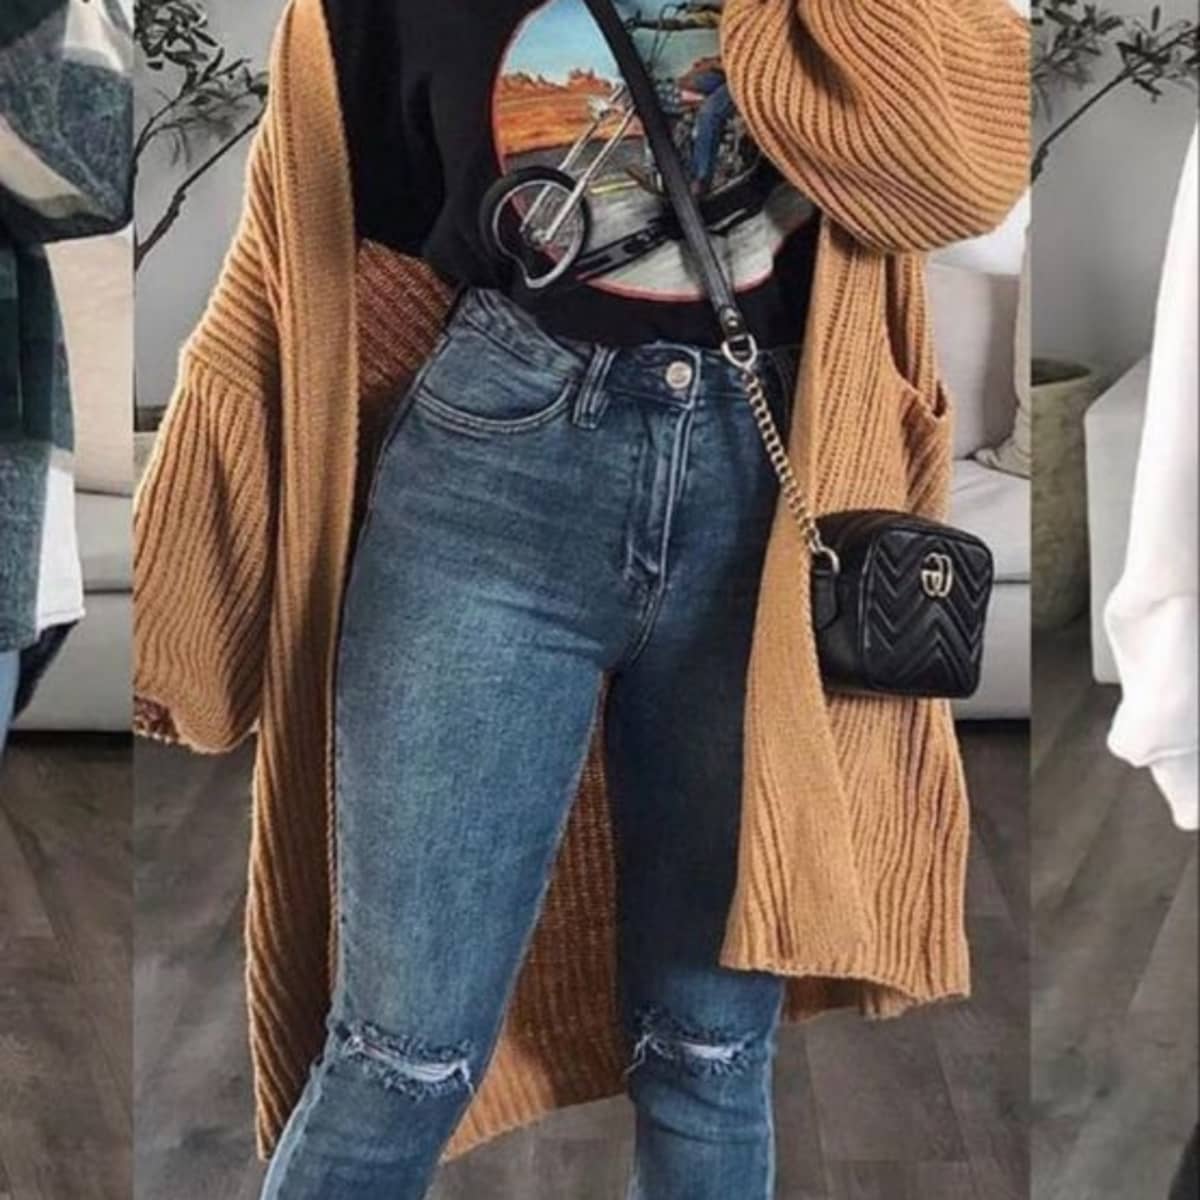 Fall Clothes for Women - Cute Fall Outfits